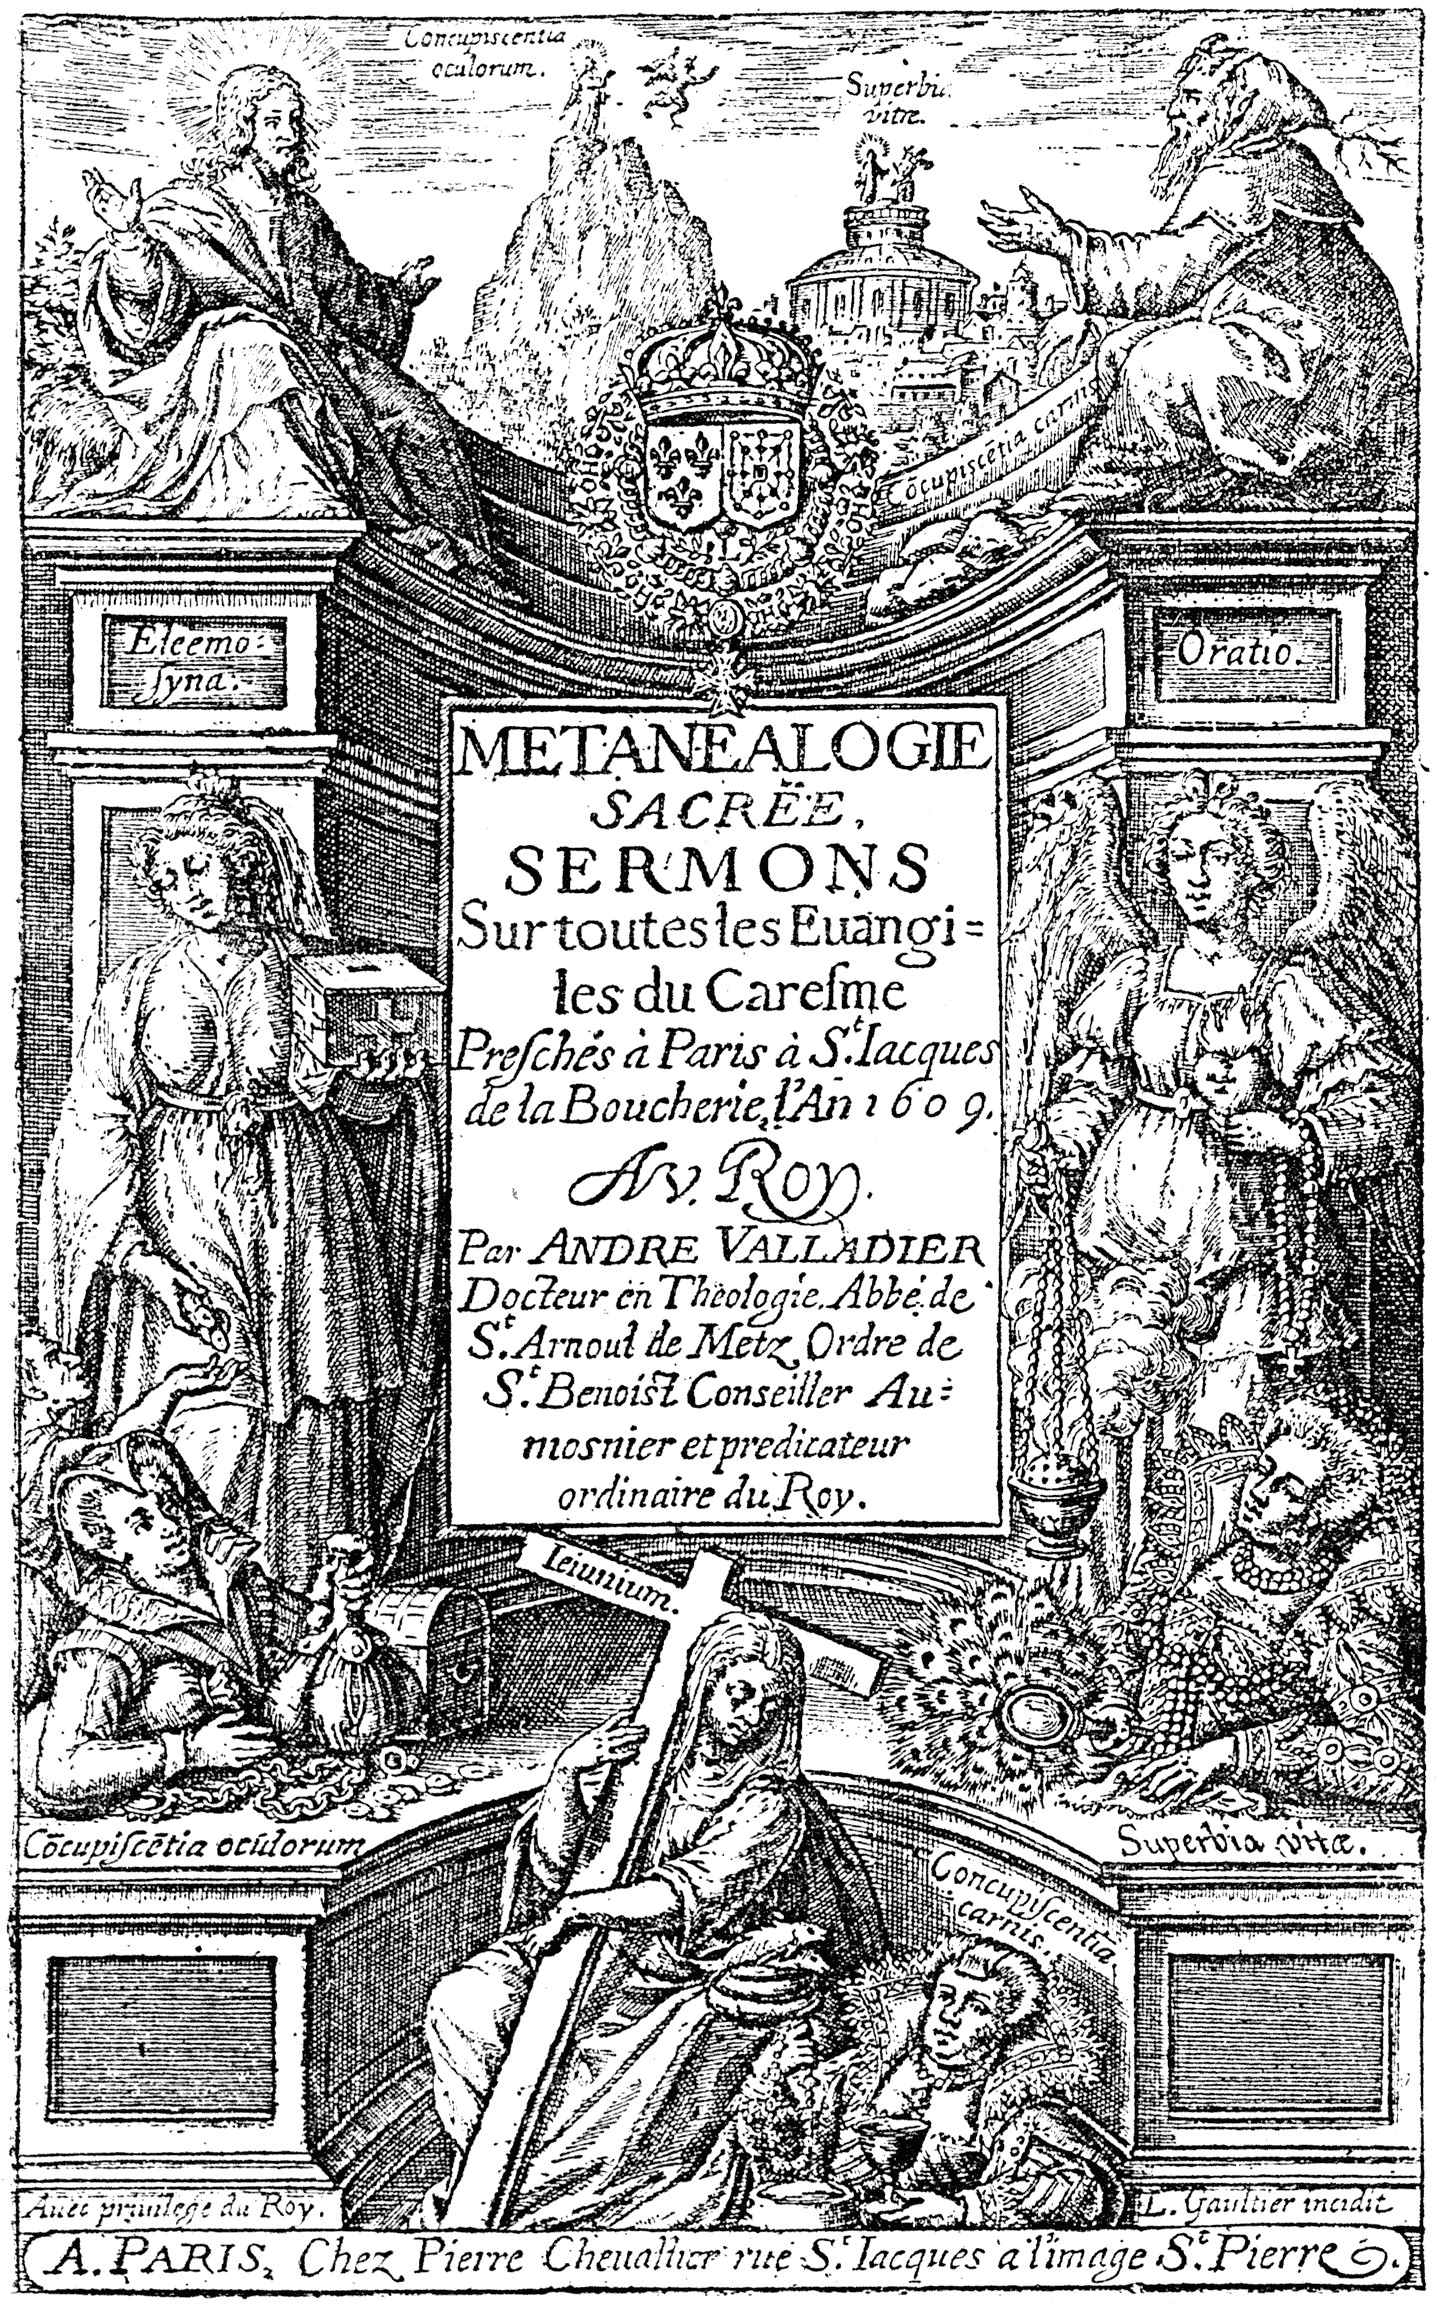 Leonard Gaultier, 17th century French engraver. Title of the 'Metanealogie Sacree' 1609. From Henri Bouchot 'The Printed Book' 1887, page 153, published size 8.8 cm wide by 14.4 cm high.